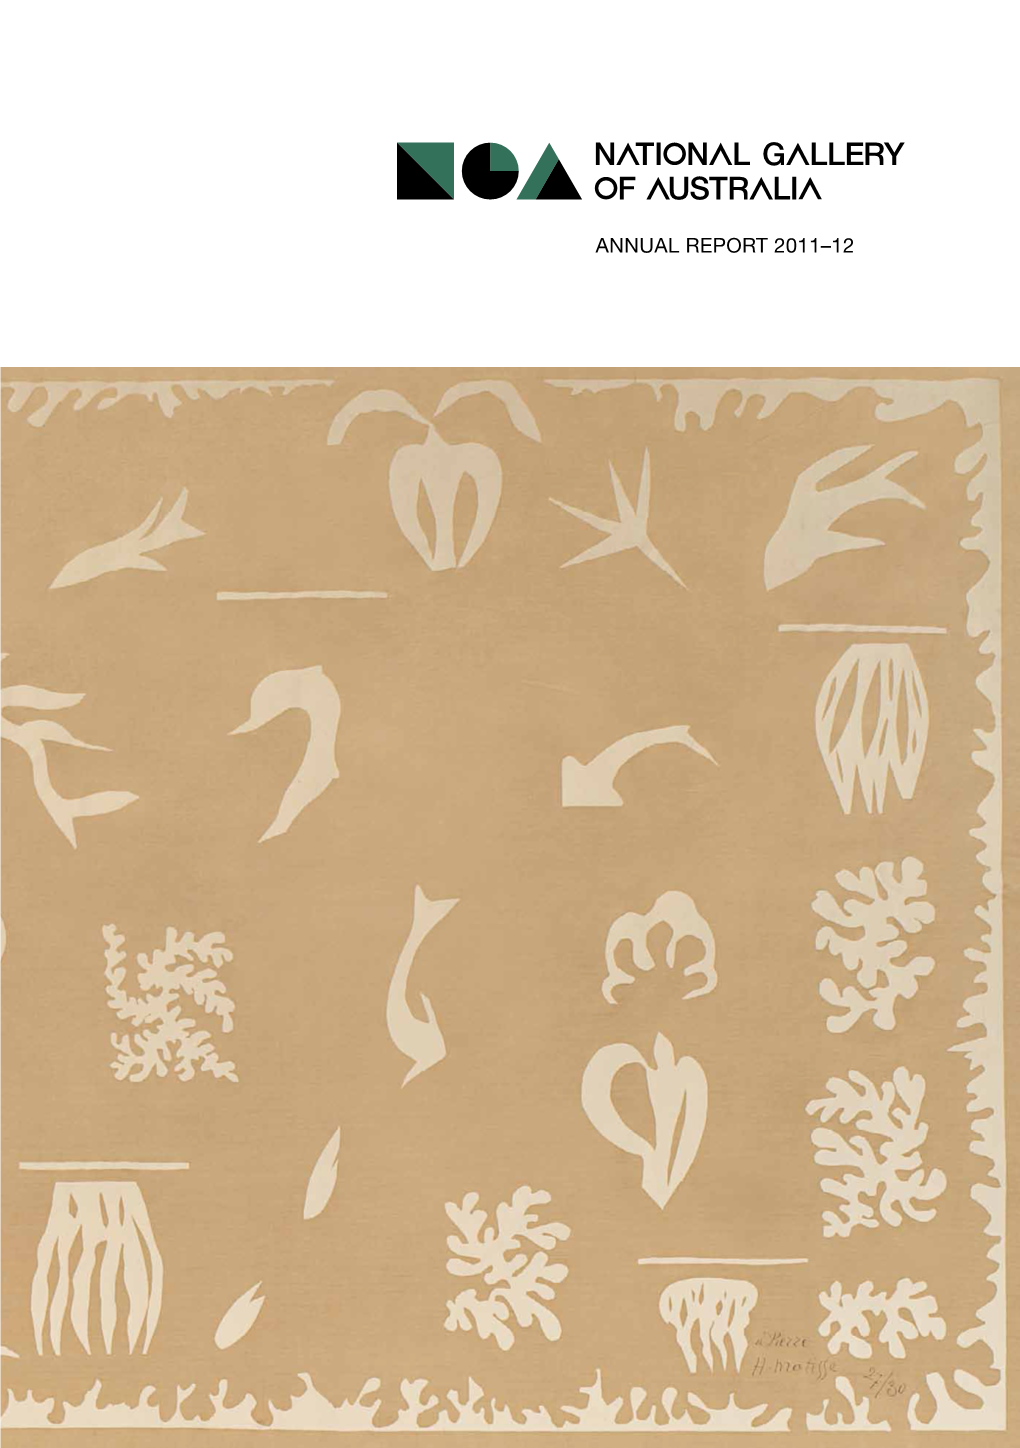 Annual Report 2011–12 Annual Report 2011–12 the National Gallery of Australia Is a Commonwealth (Cover) Authority Established Under the National Gallery Act 1975